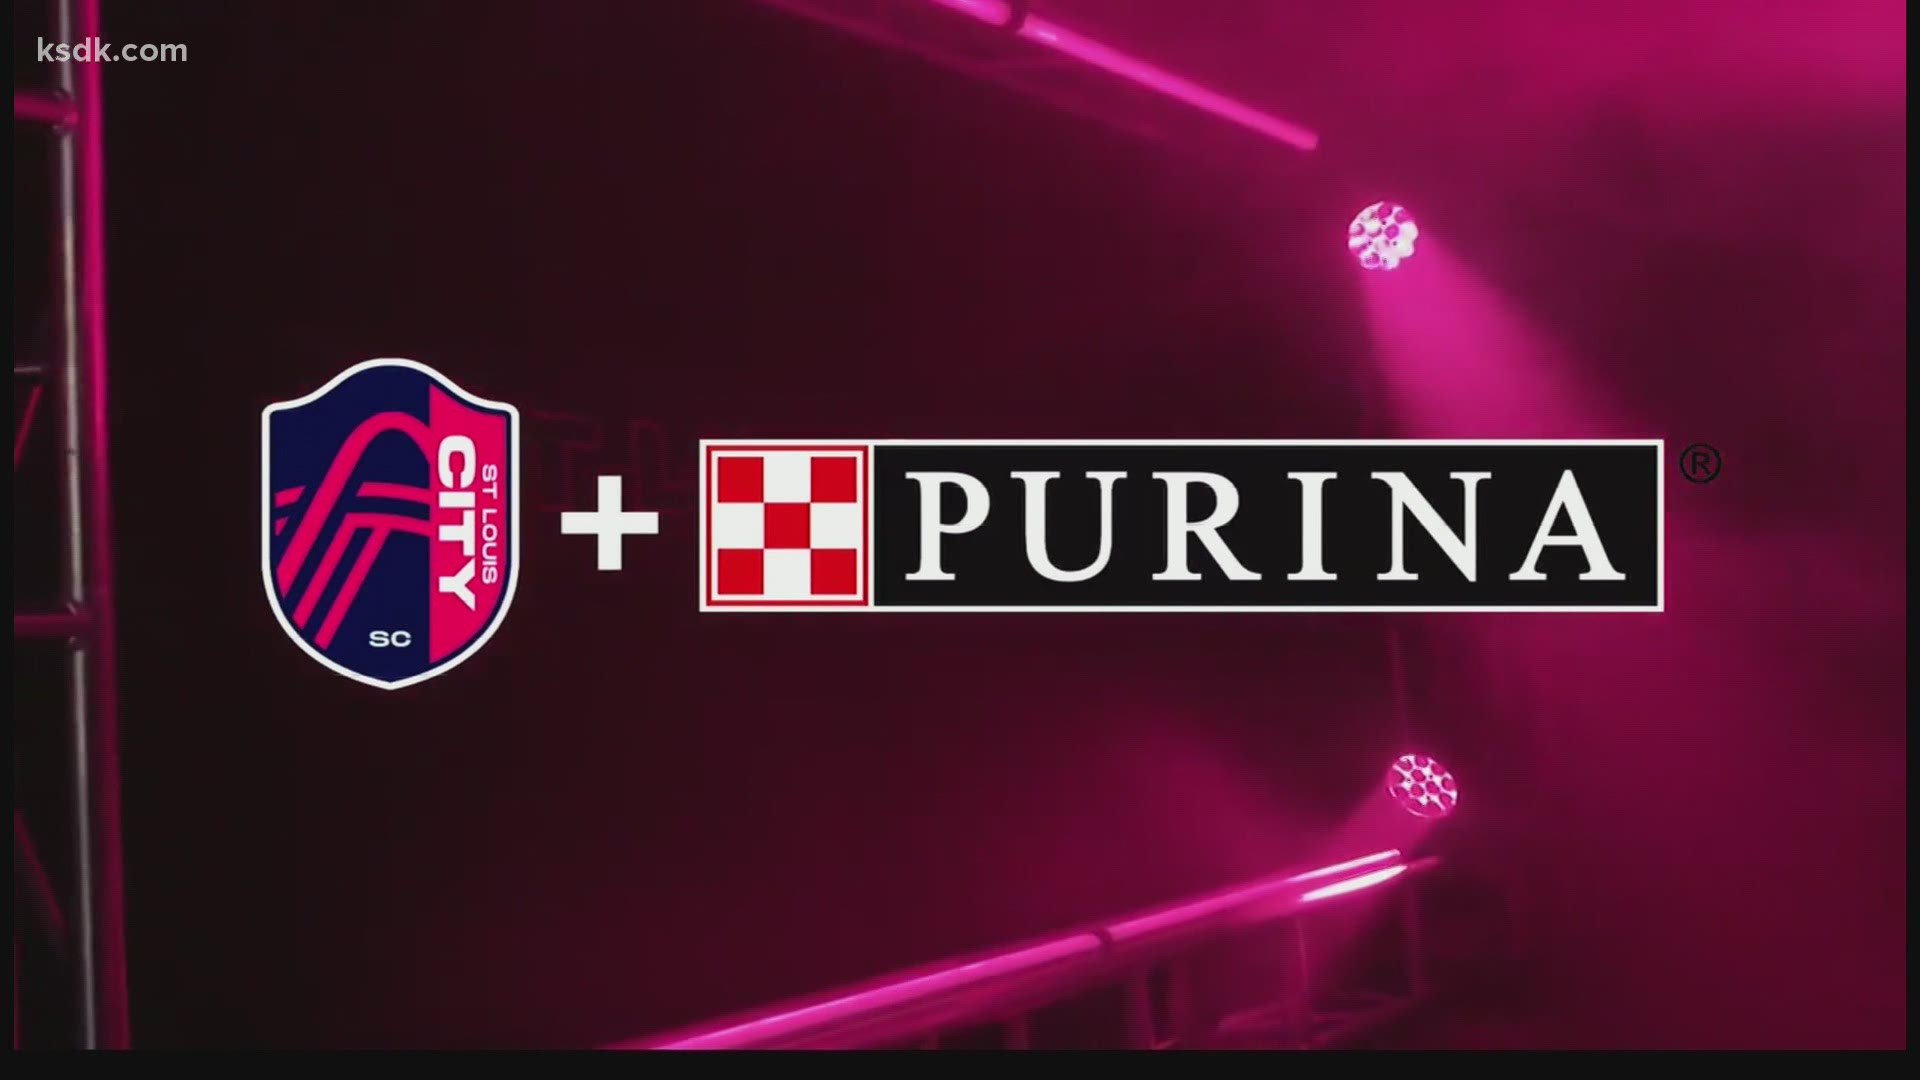 St. Louis CITY SC's Founding Kit Partnership With Purina A Win For  Community-Building, Fan Engagement And Female Empowerment